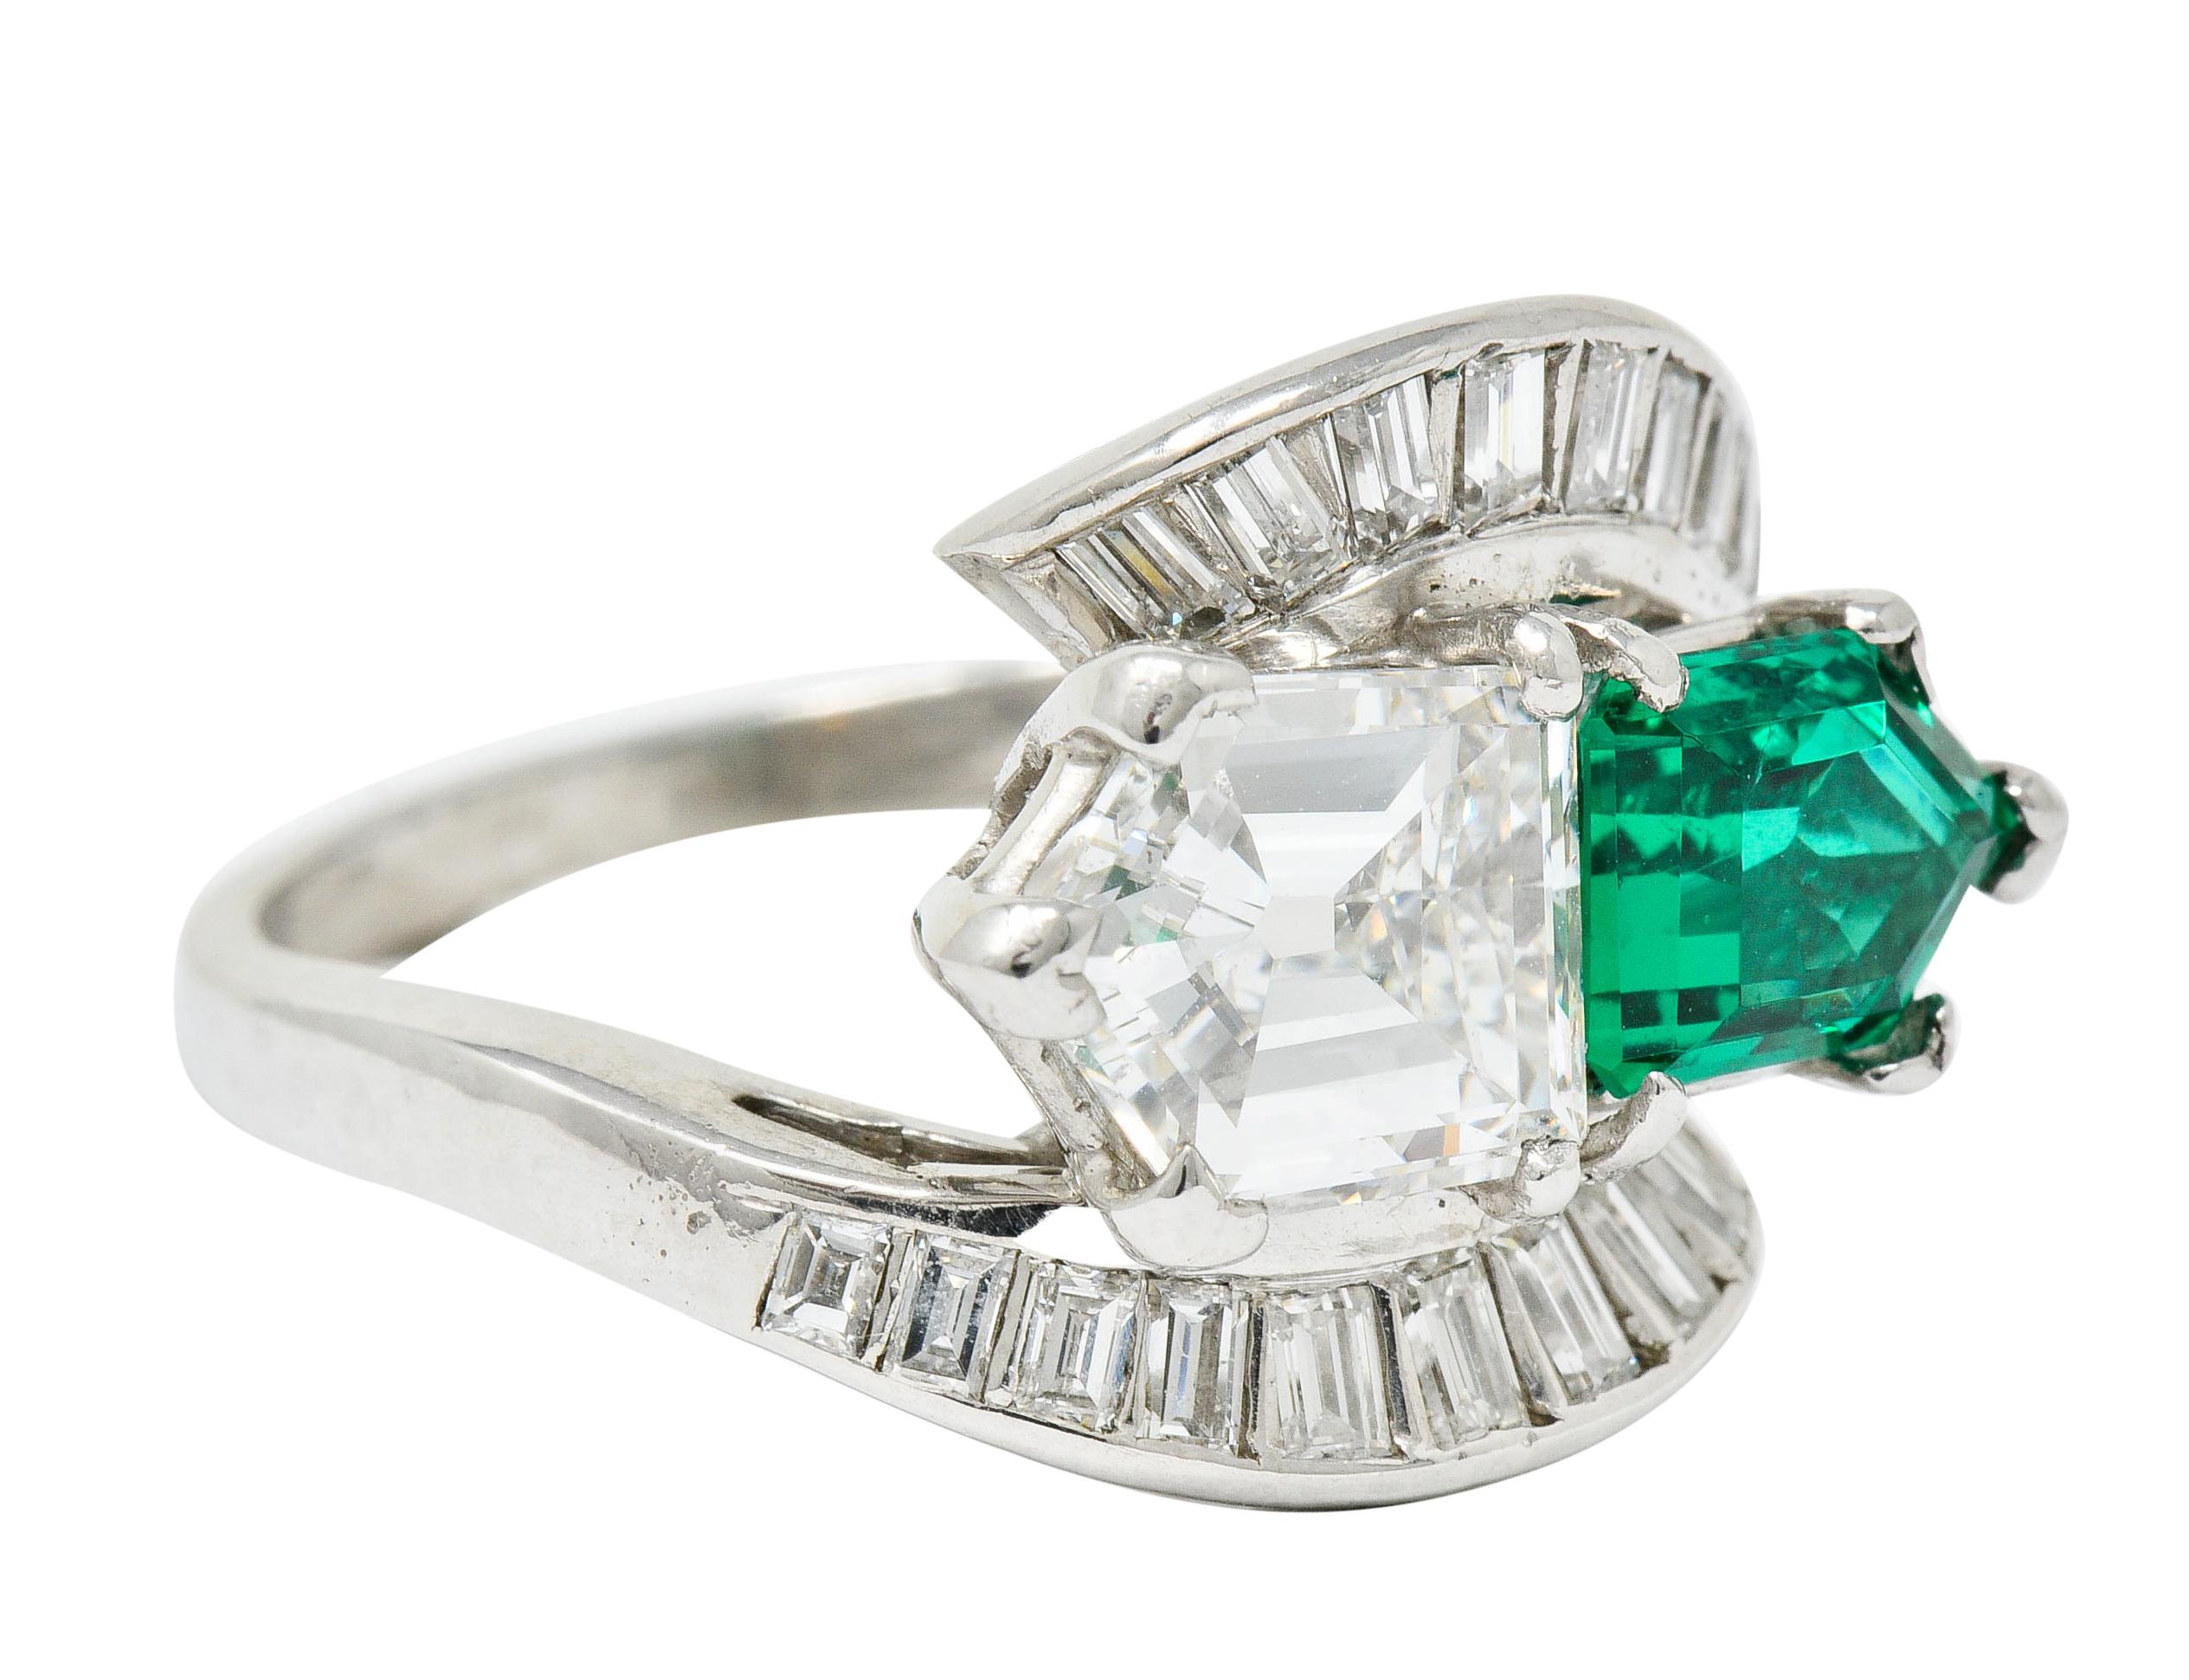 Bypass style ring centering a bullet cut emerald and a bullet cut diamond

Diamond weighs approximately 1.65 carat with F color and VS clarity

Emerald weighs approximately 1.00 carat with very transparent deep green color

Flanked by channel set